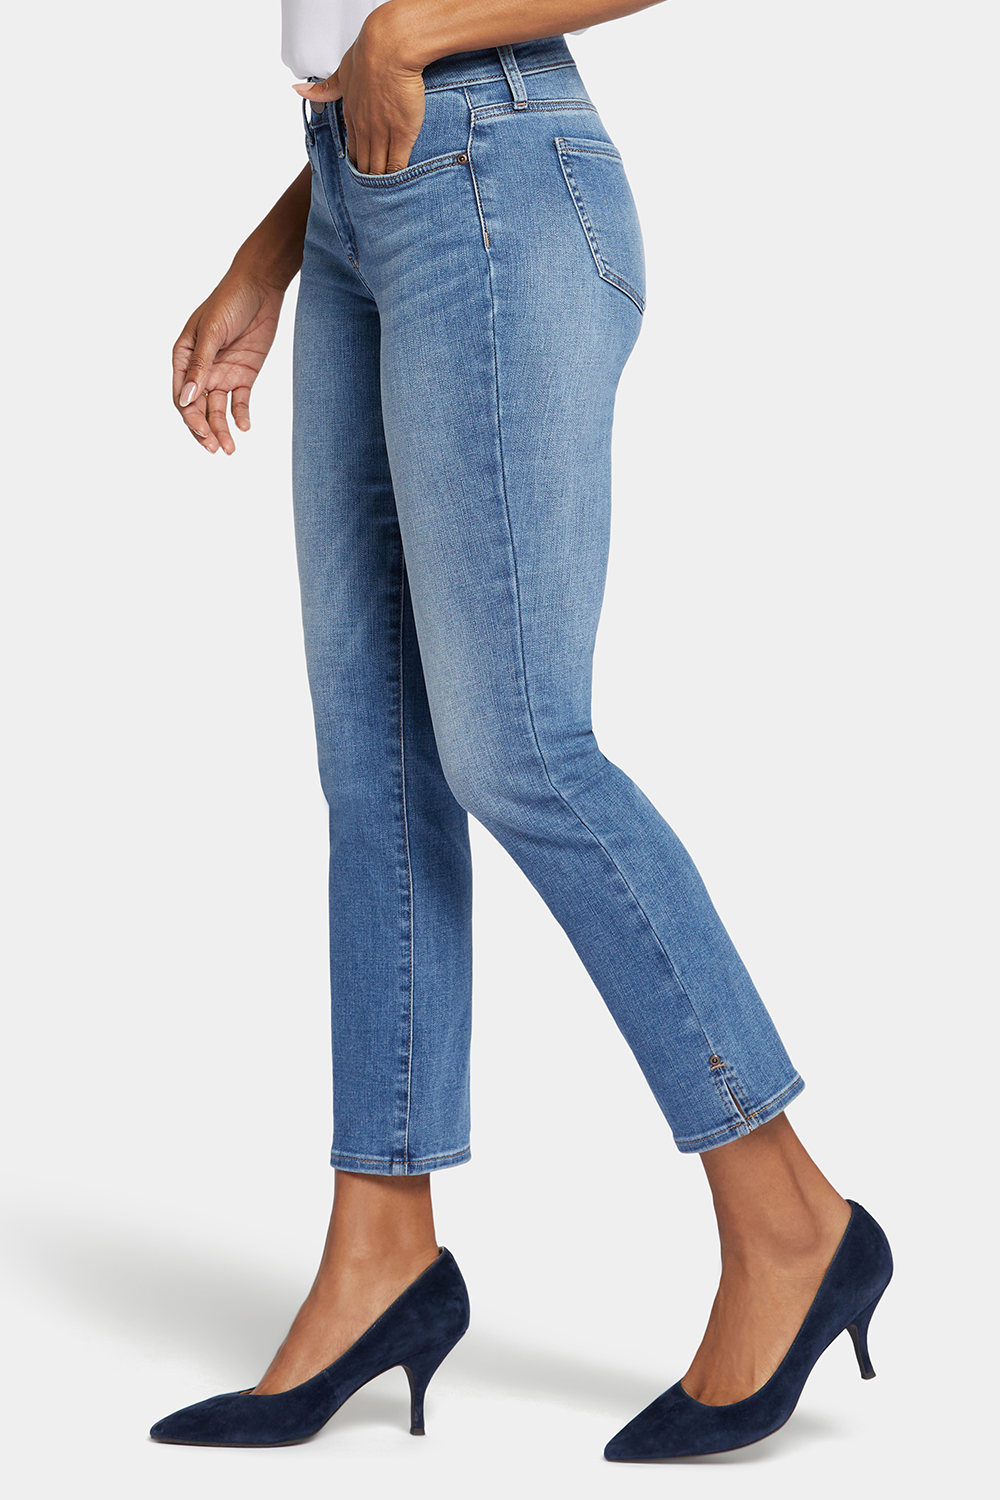 NYDJ Sheri Slim Ankle Jeans In Petite With Riveted Side Slits - Maele